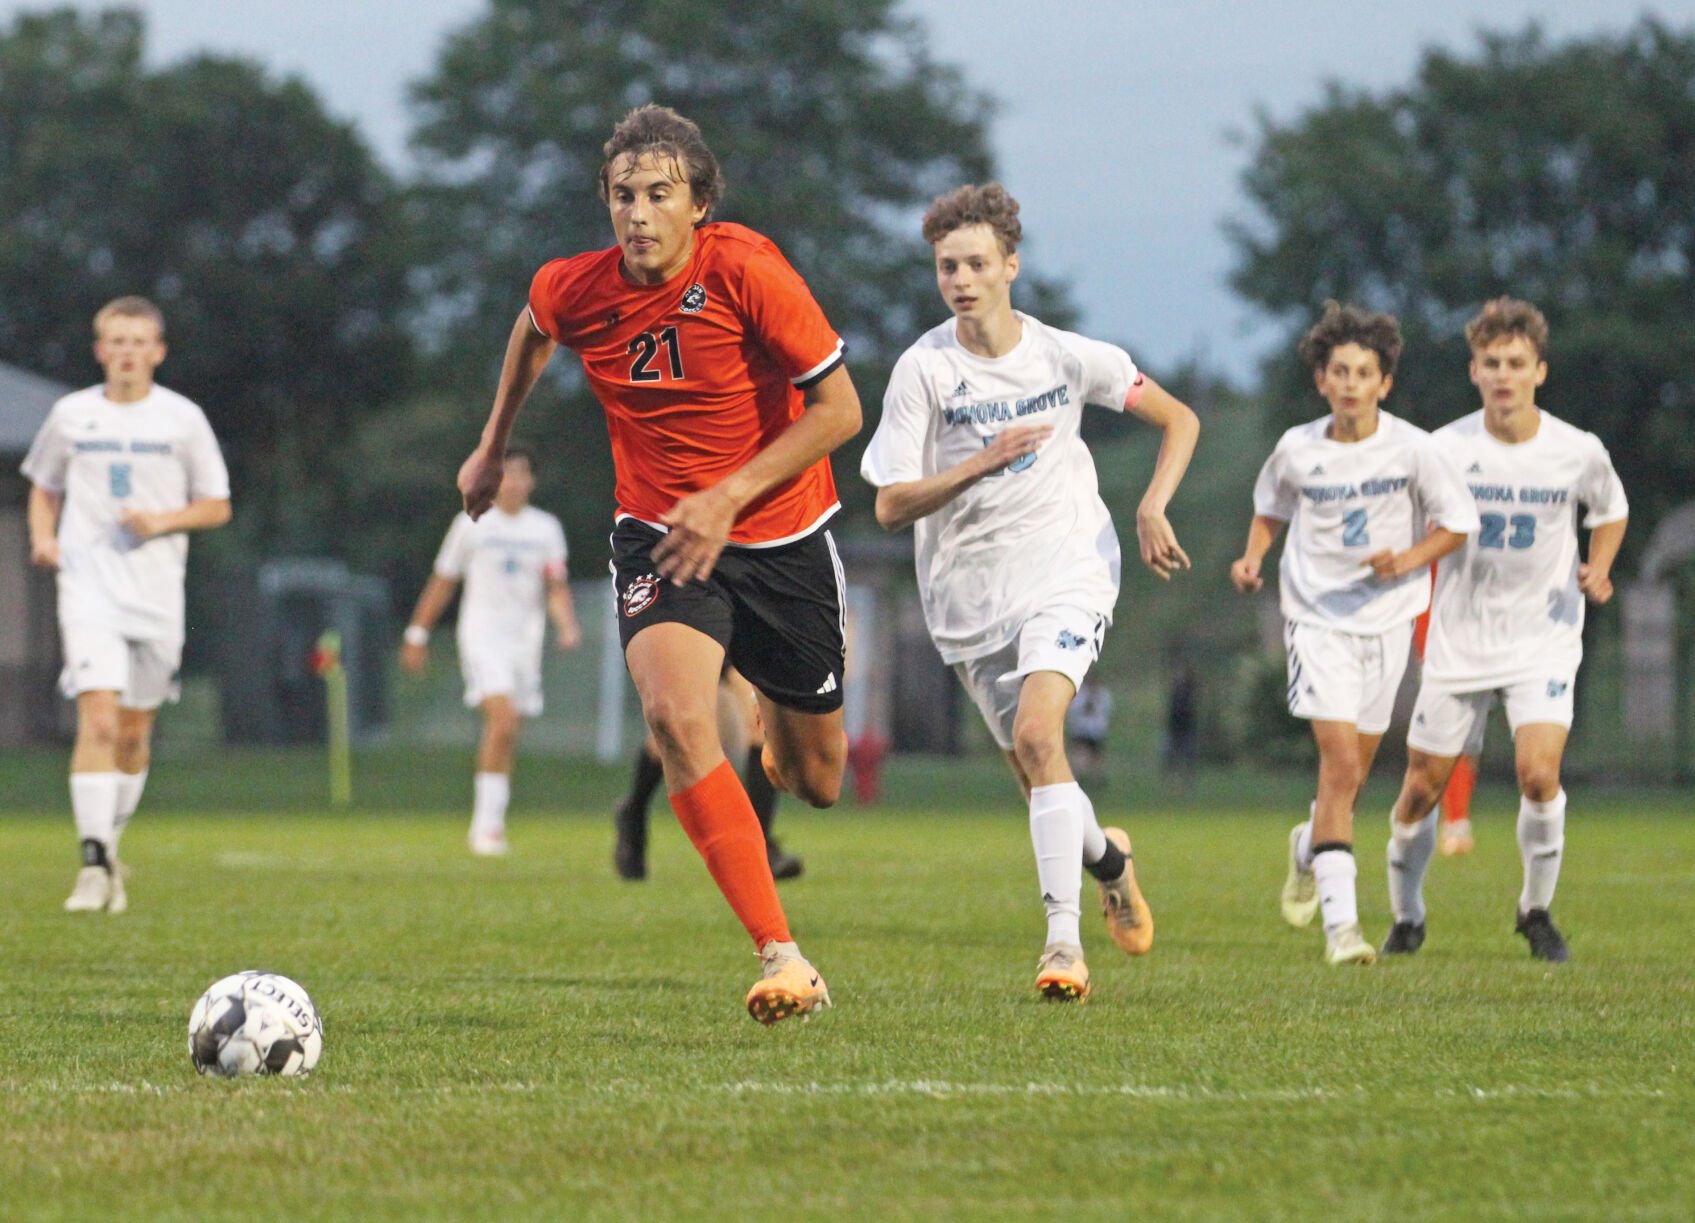 Boys soccer: Oregon draws with Pewaukee in nonconference clash